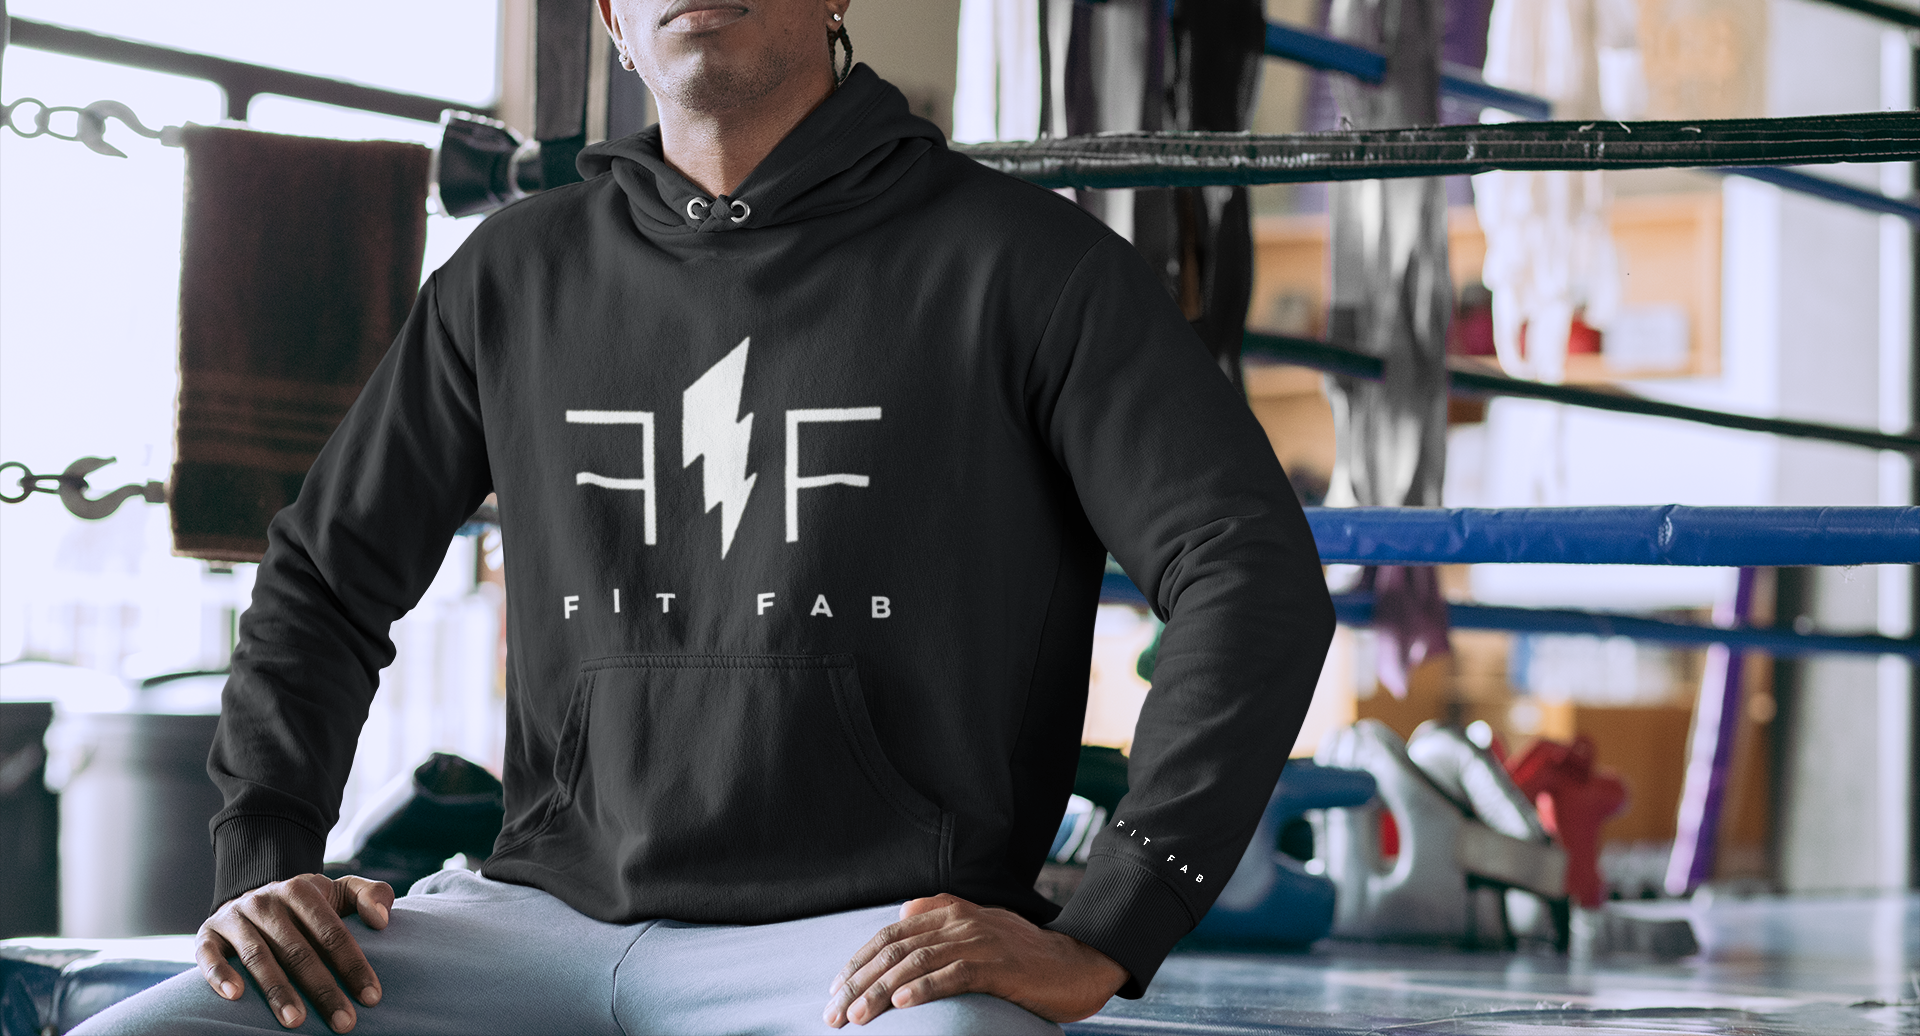 Fit Fab Unisex Pullover hoodie